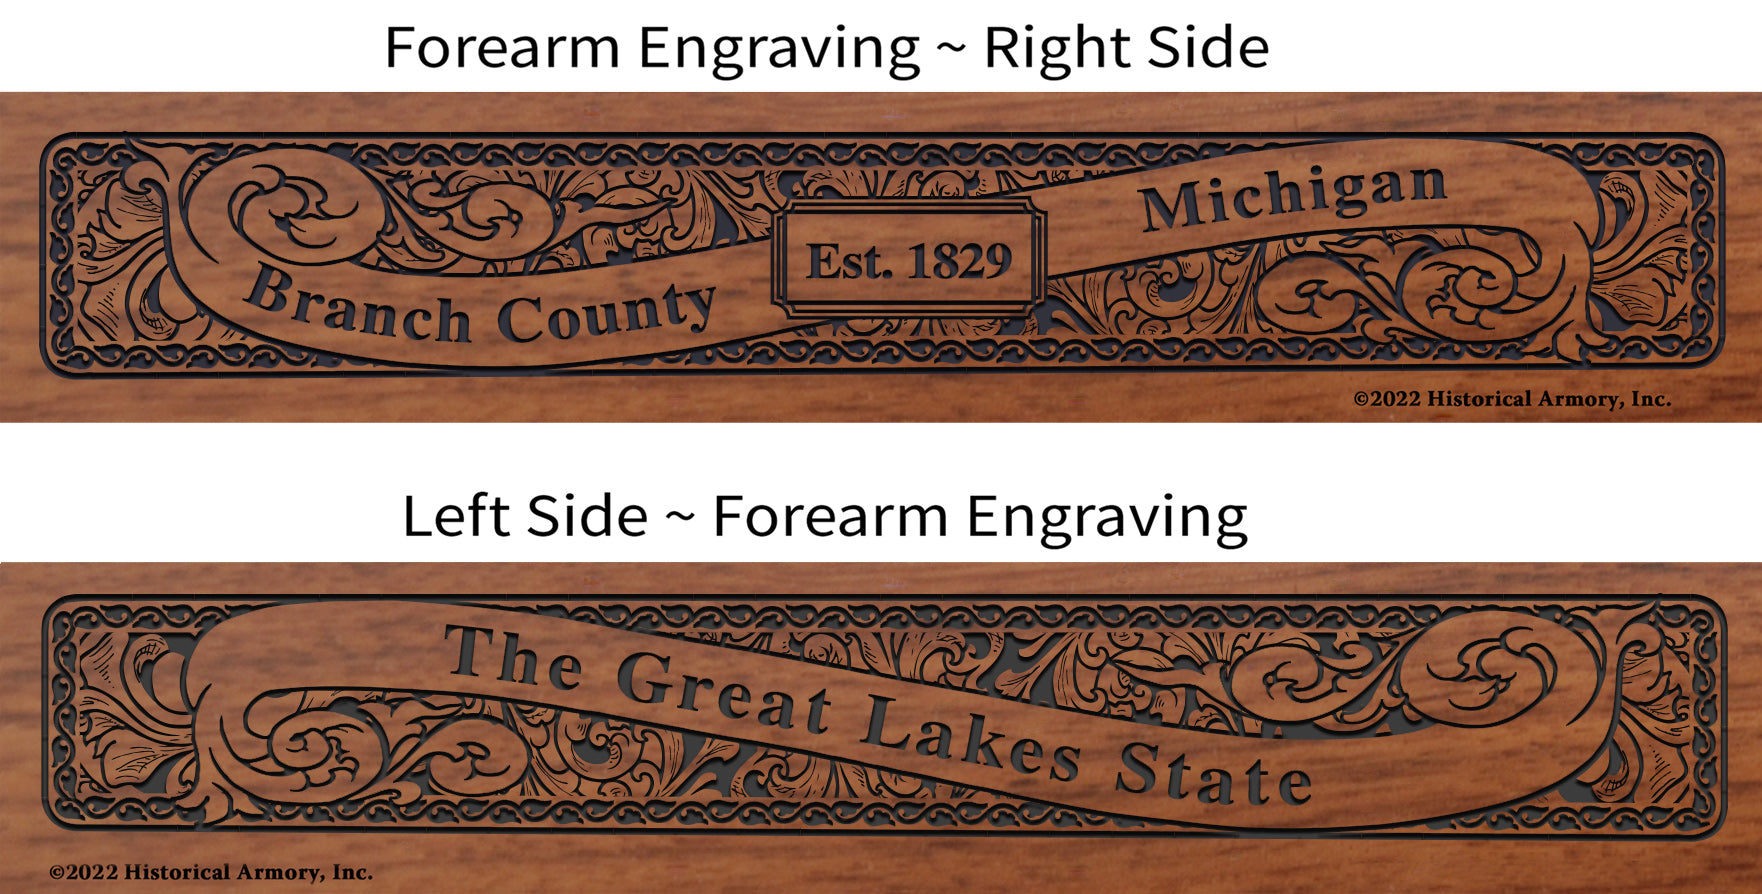 Branch County Michigan Engraved Rifle Forearm